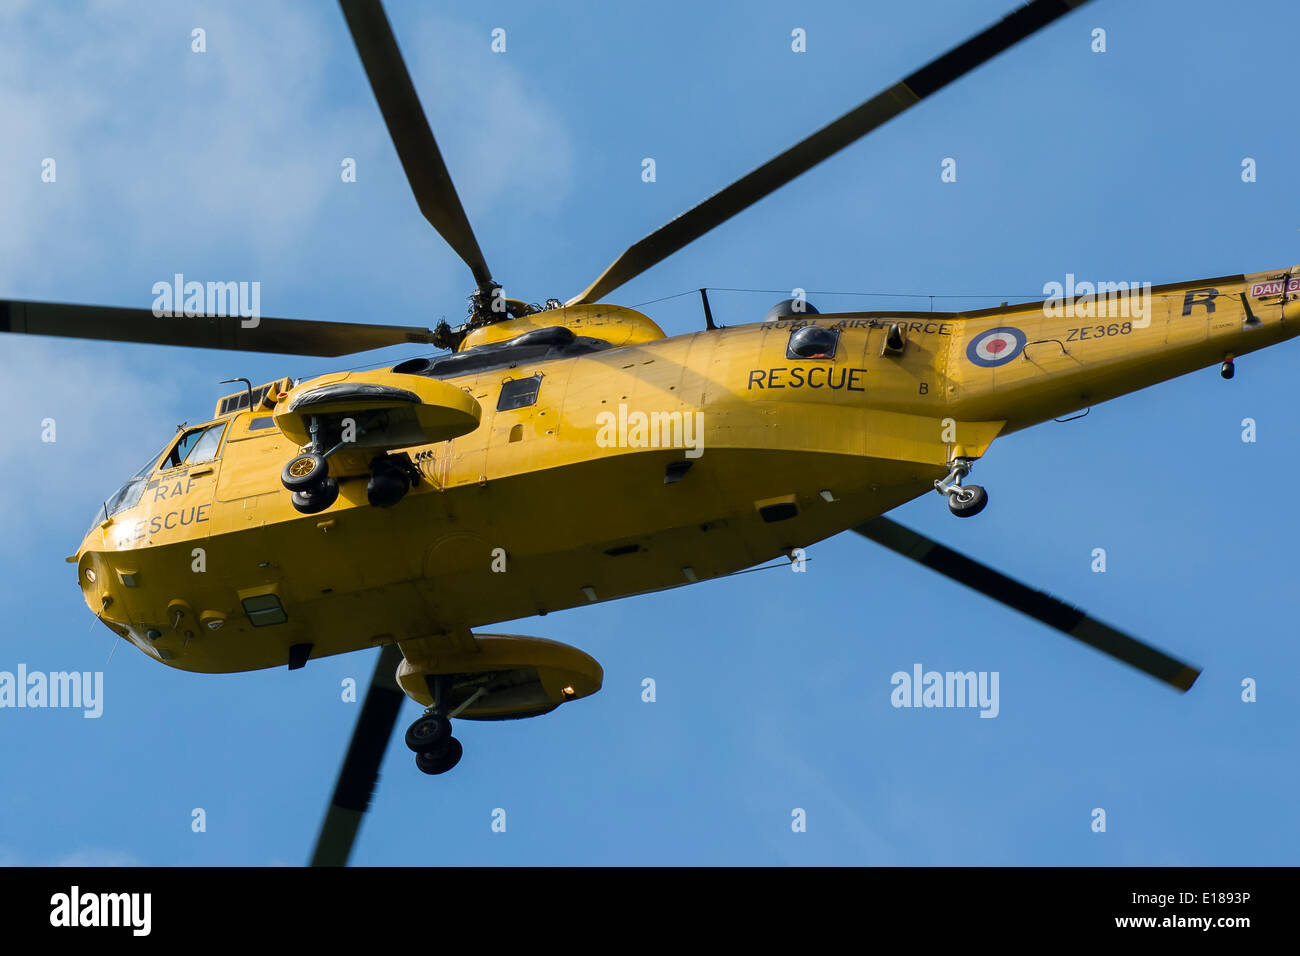 Air sea rescue helicopter in flight Stock Photo